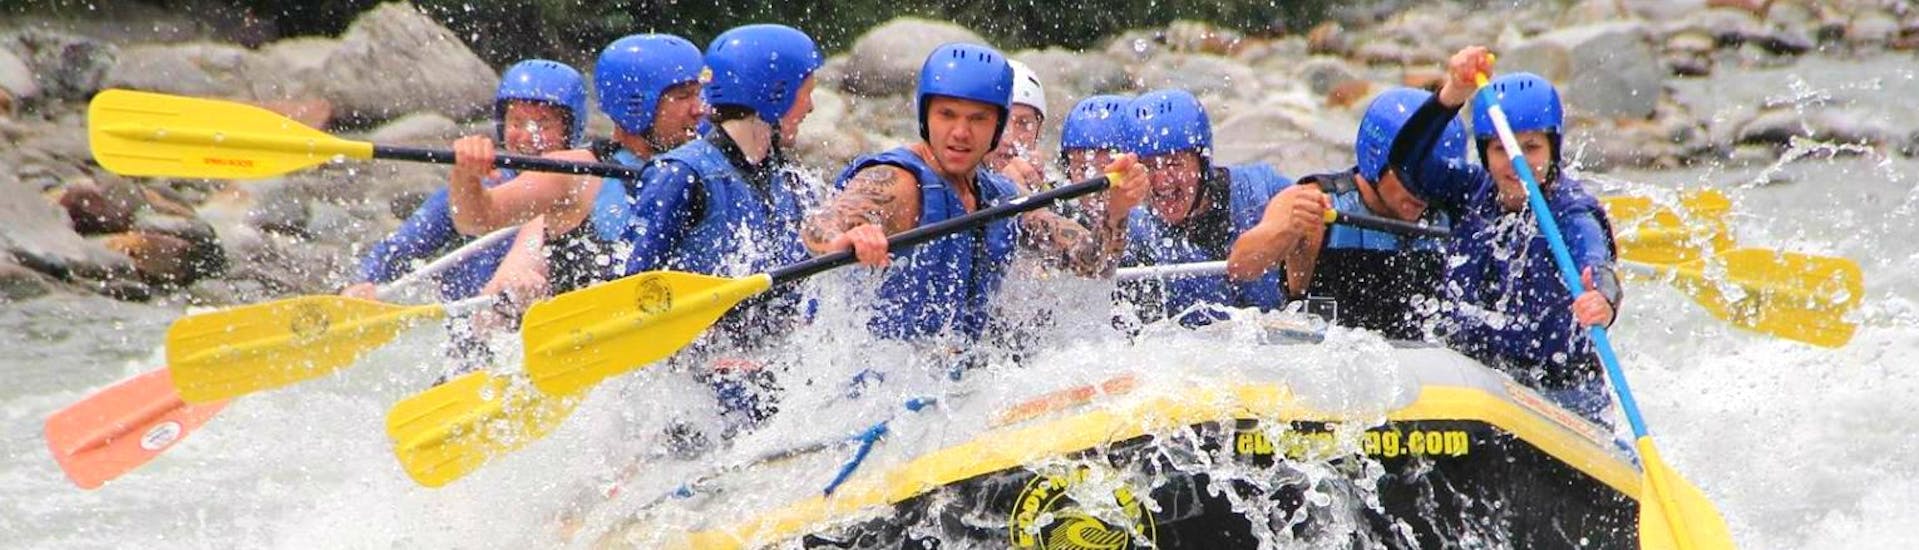 Rafting expert à Ainet - Isel.